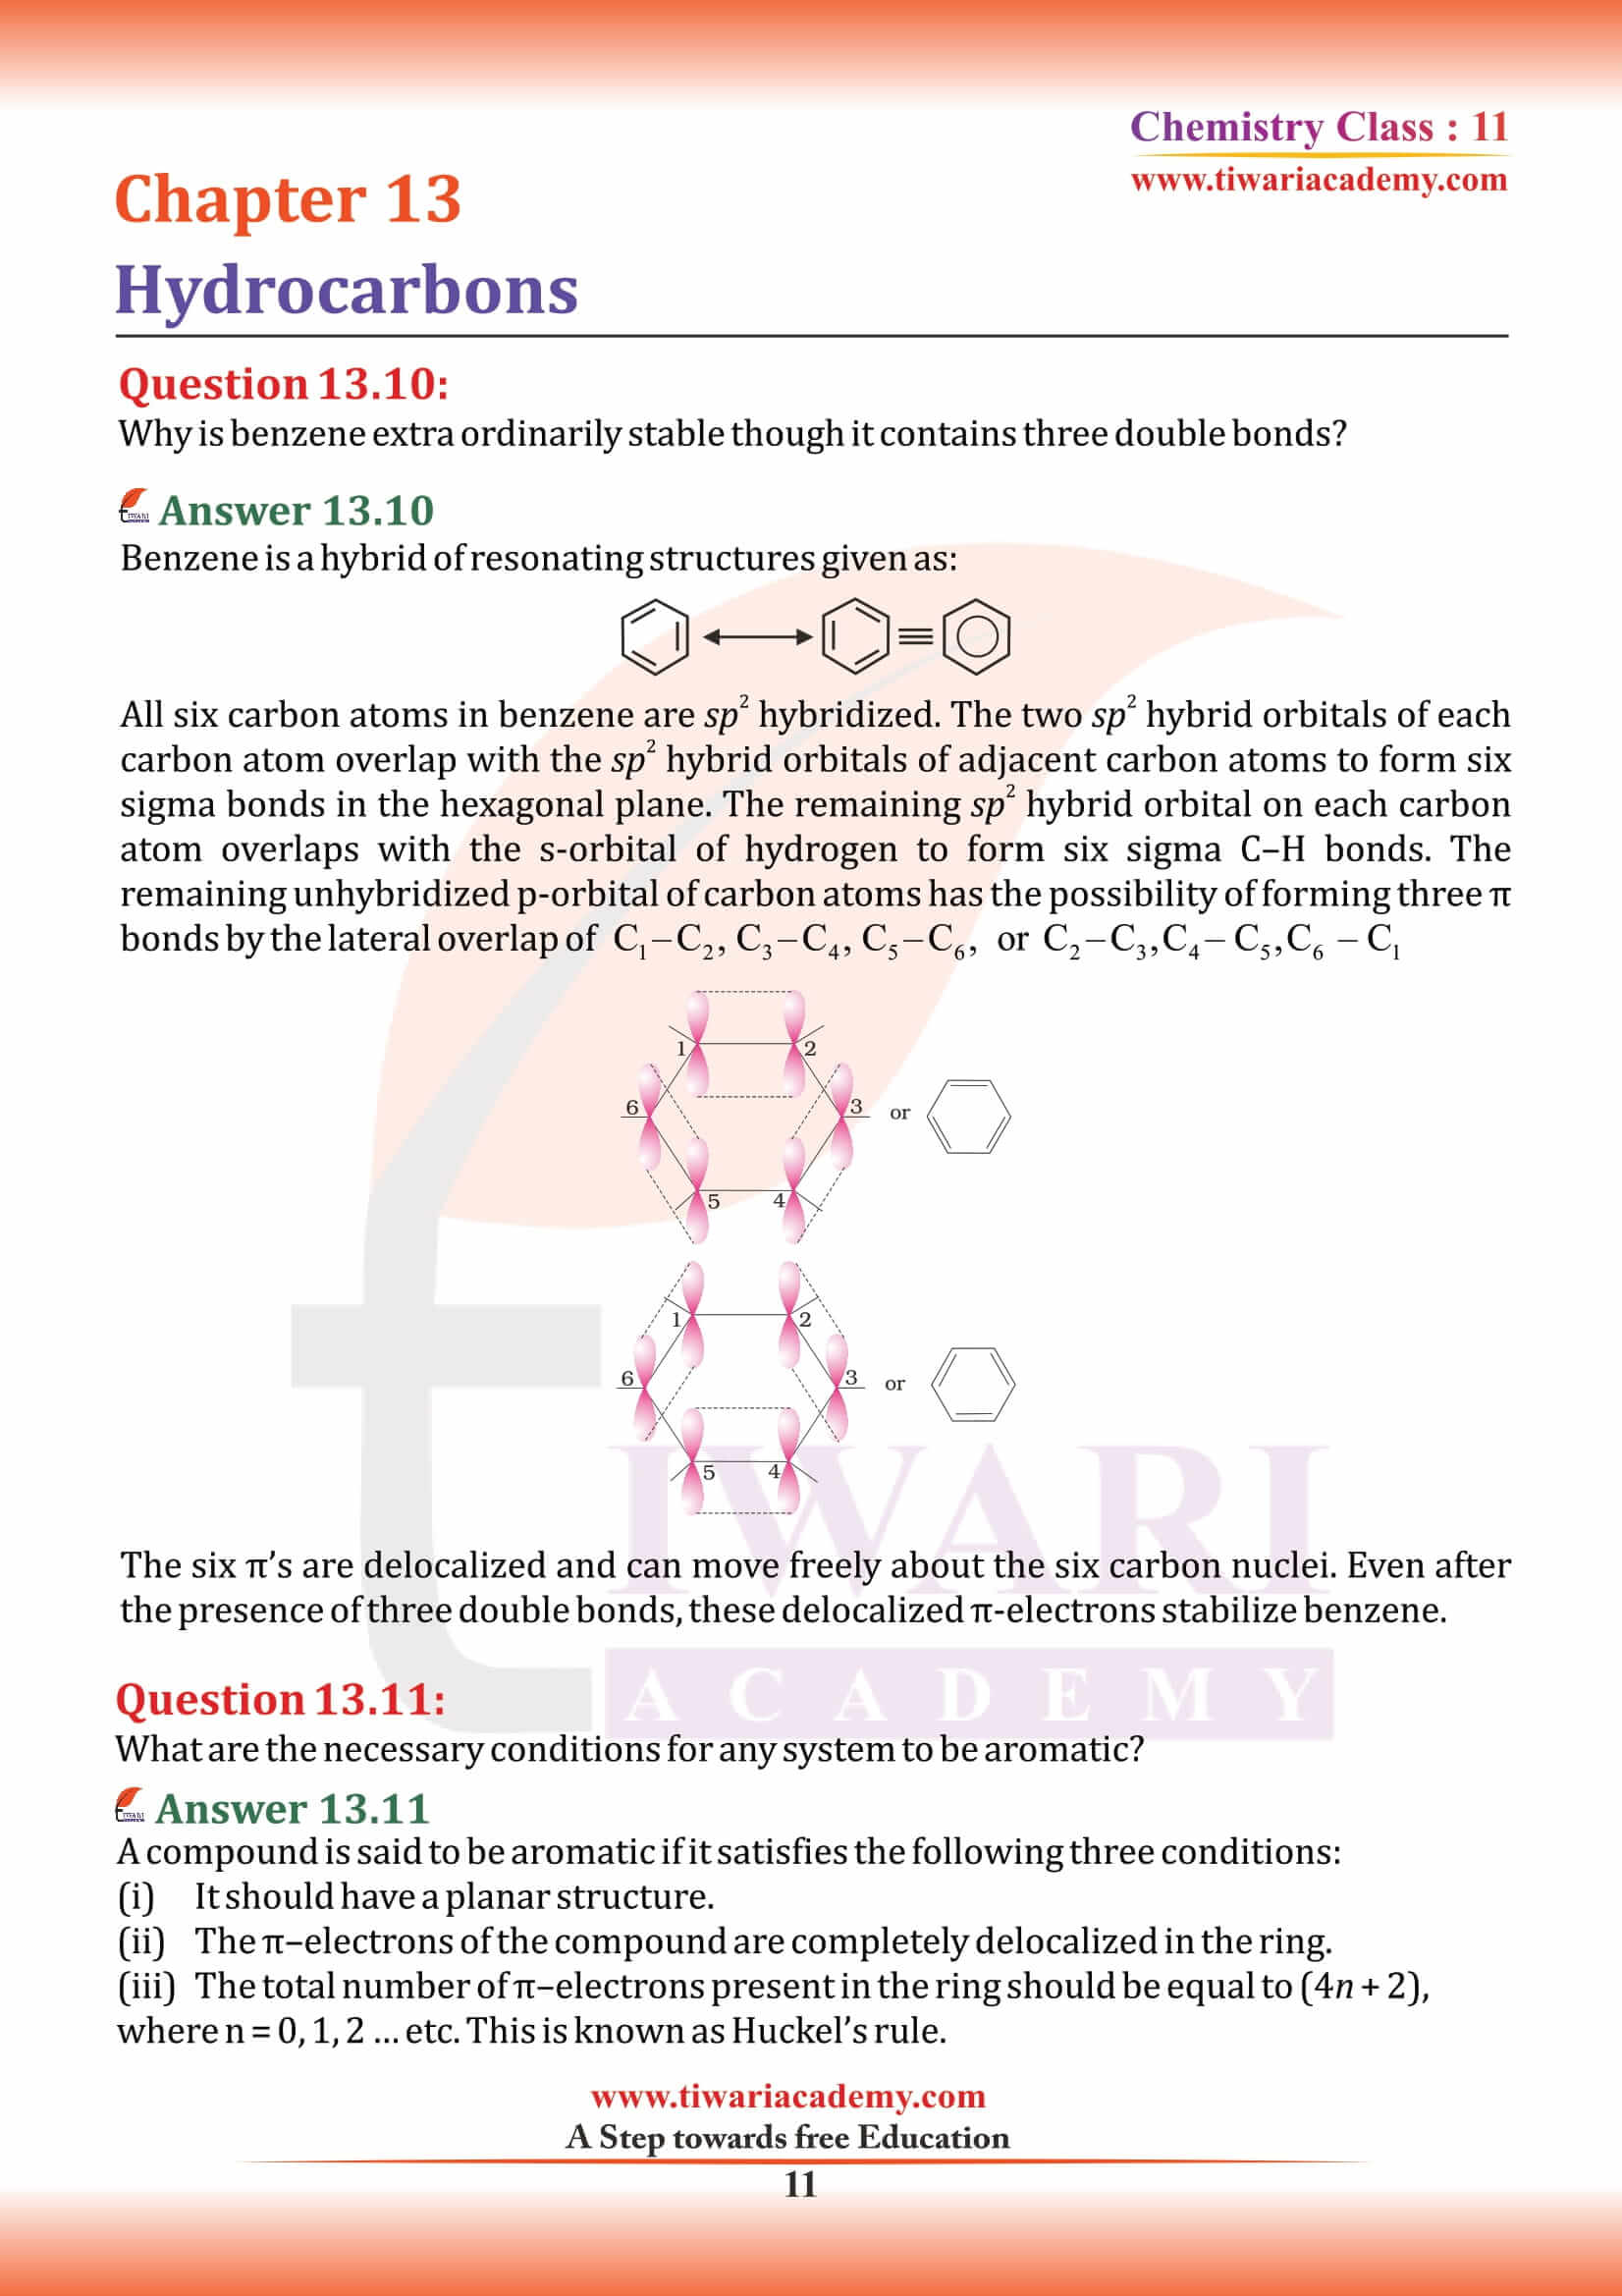 Class 11 Chemistry Chapter 13 exercise answers